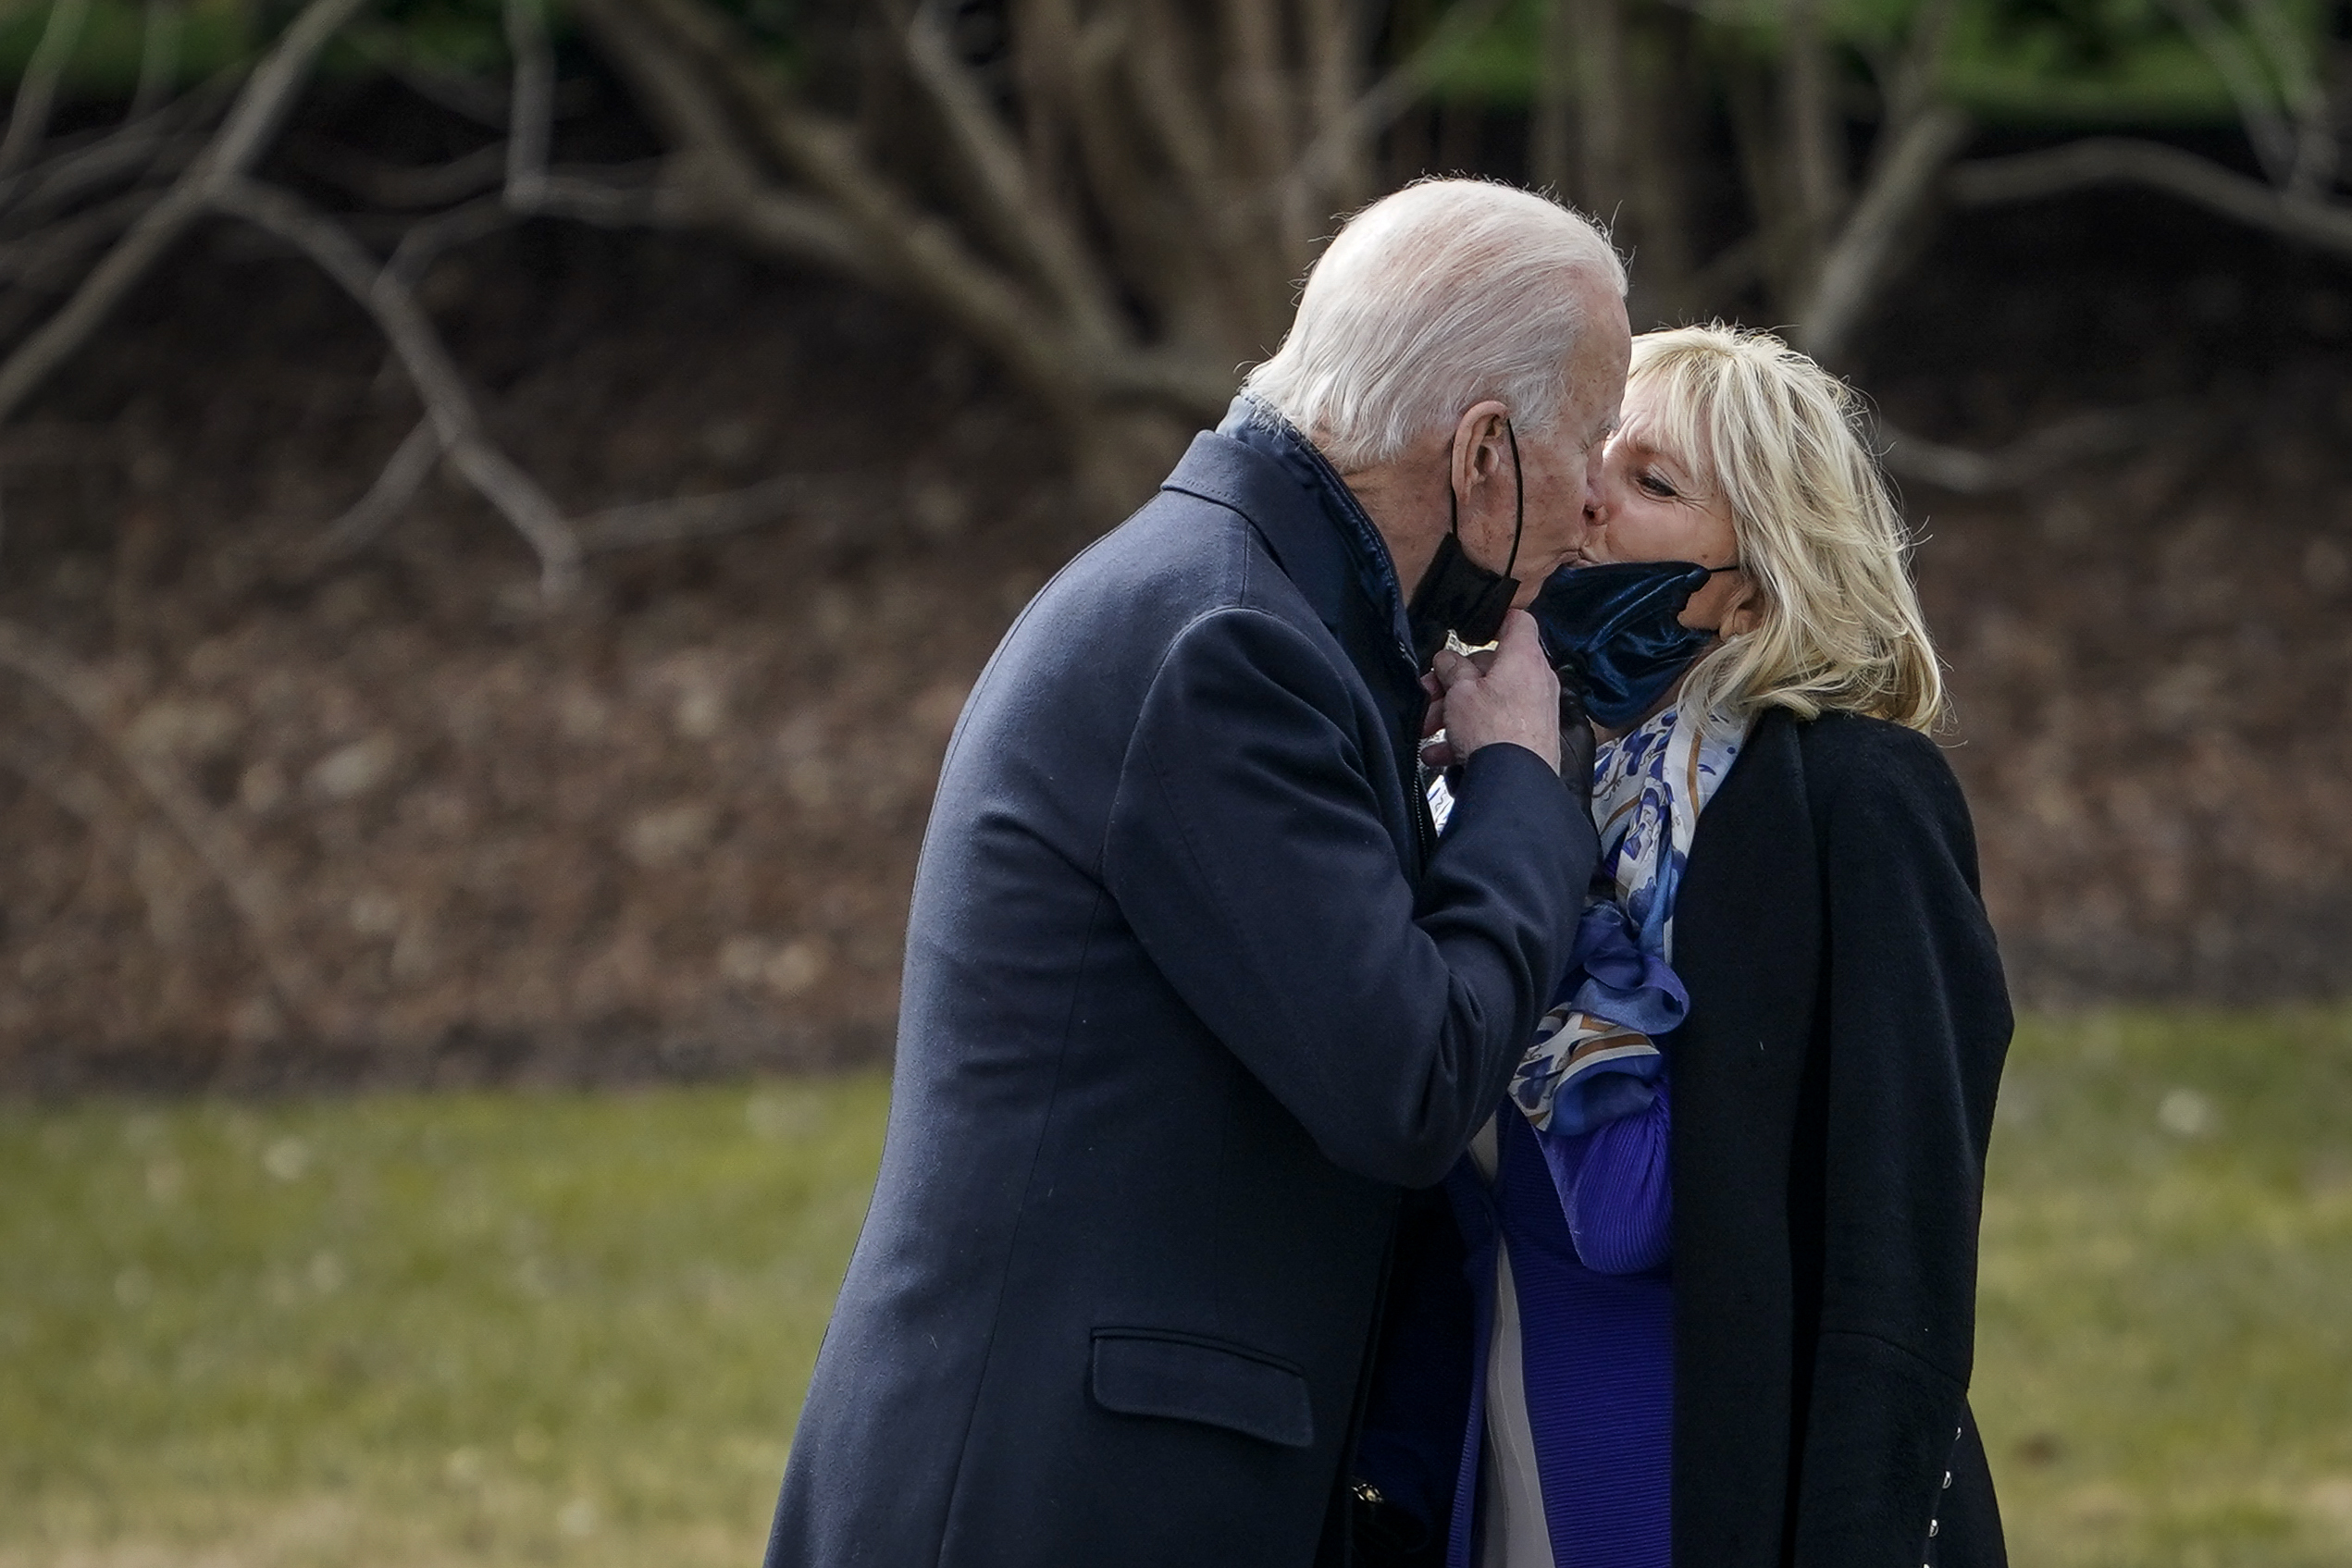 U.S. President Joe Biden kisses his wife first lady Dr. Jill Biden as he walks to Marine One on the South Lawn of the White House on January 29, 2021 in Washington, DC. (Drew Angerer/Getty Images)